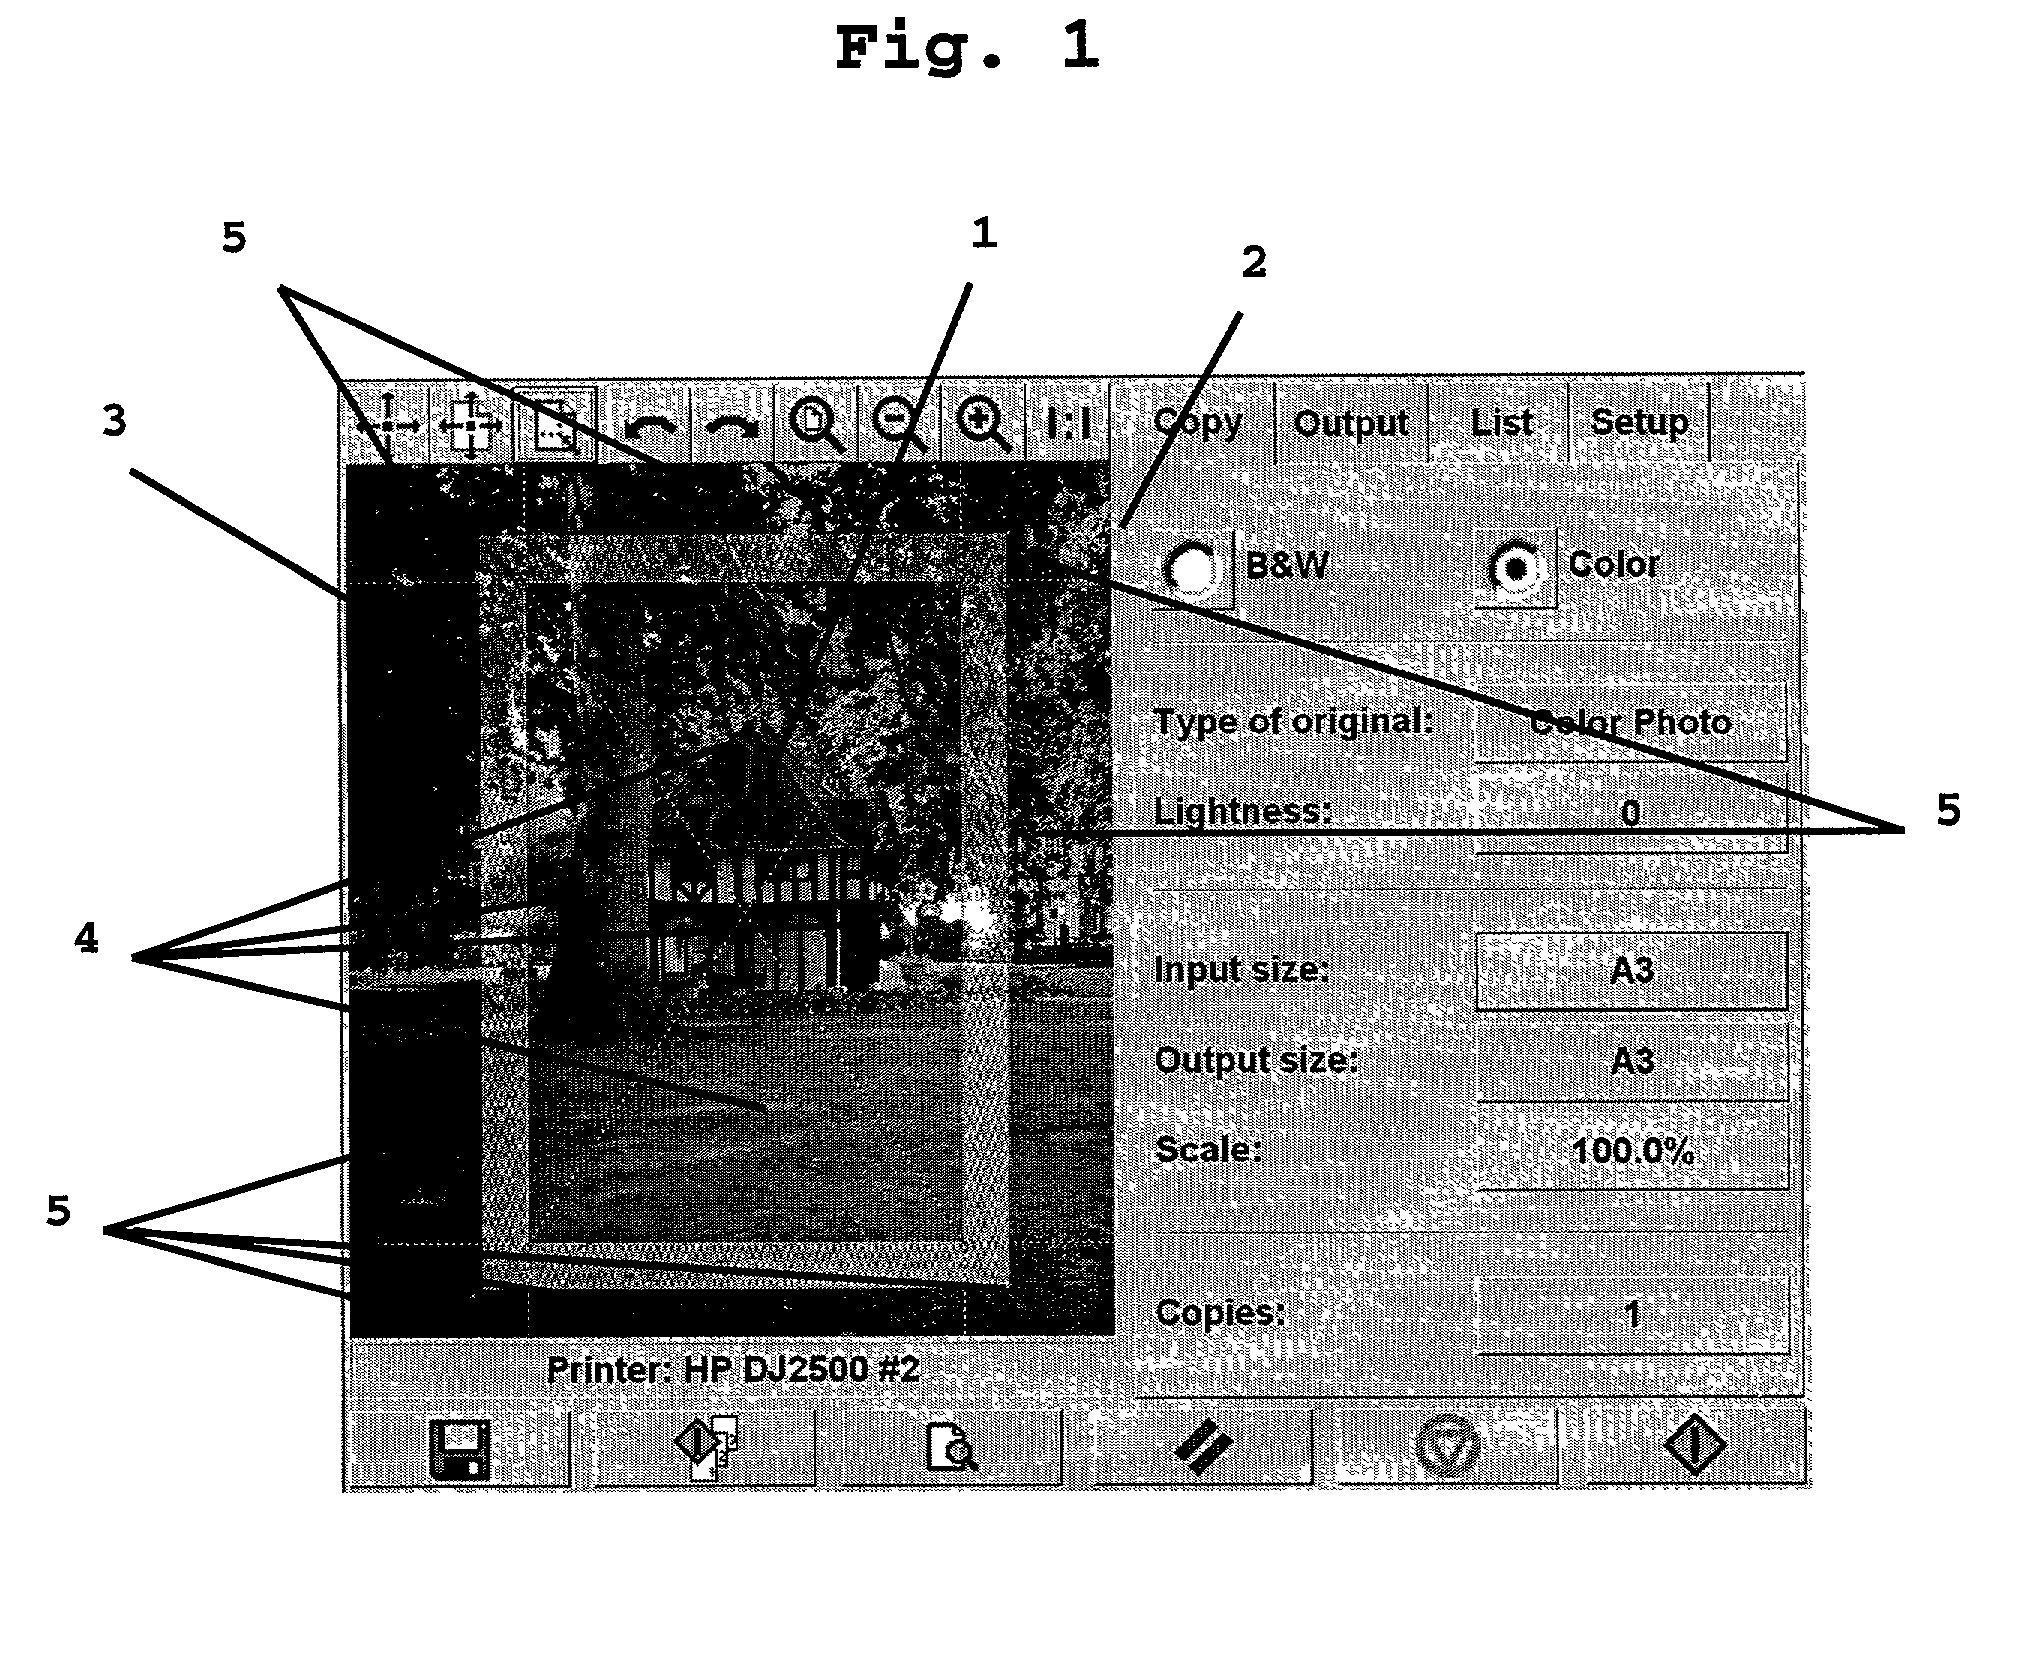 Method for resizing and moving an object on a computer screen